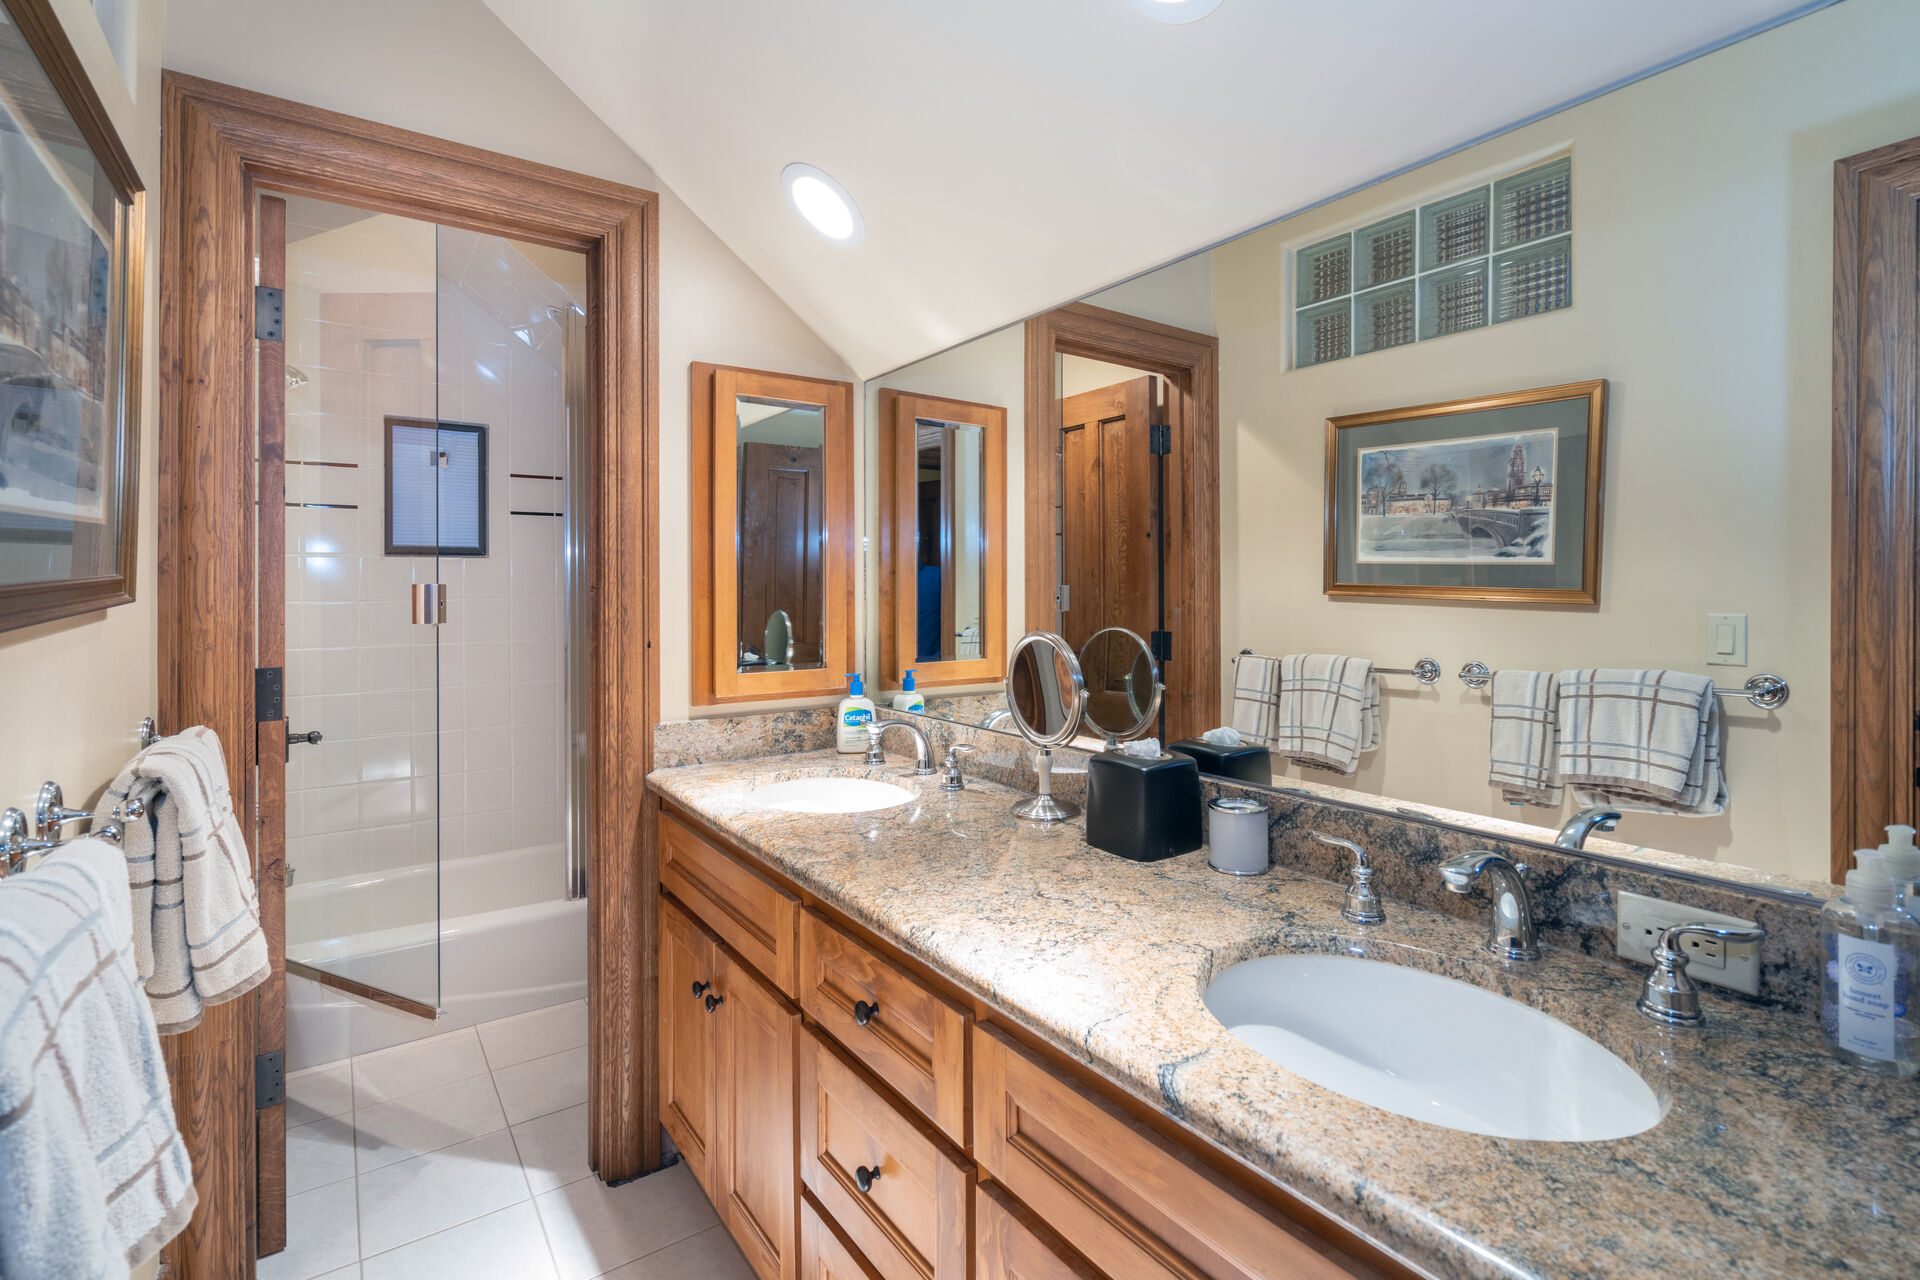 Double vanity sinks with separate shower room in this bathroom.